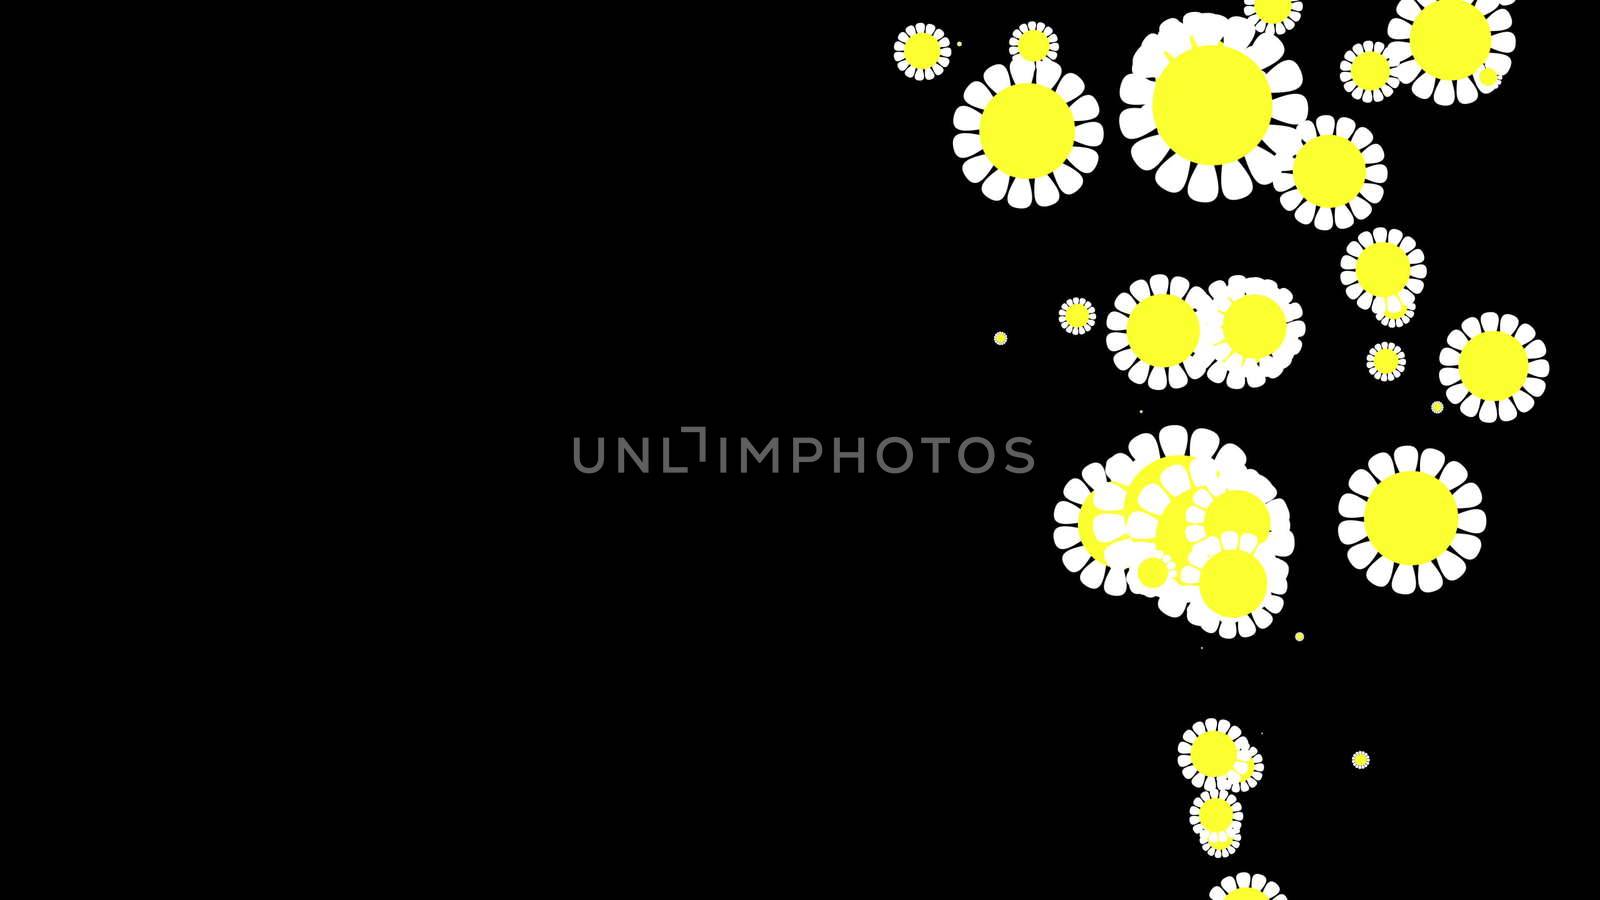 Computer Graphic flower background. White and yellow color.